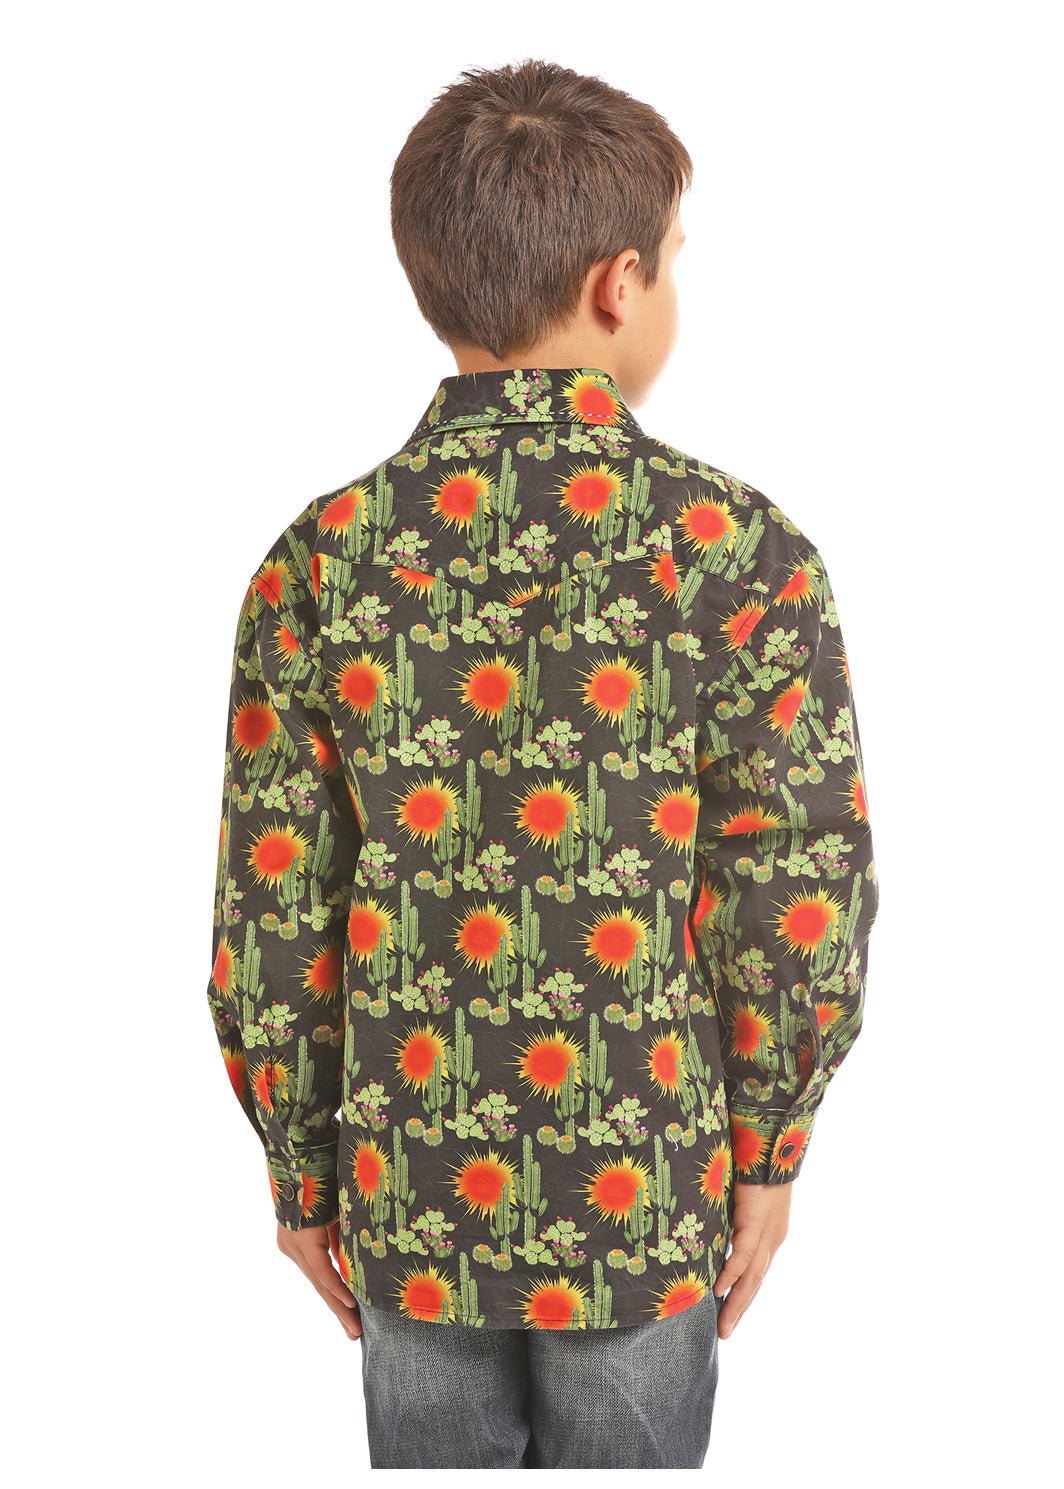 Rock and Roll Boys Dale Brisby Cactus Snap Shirt #B8S2329